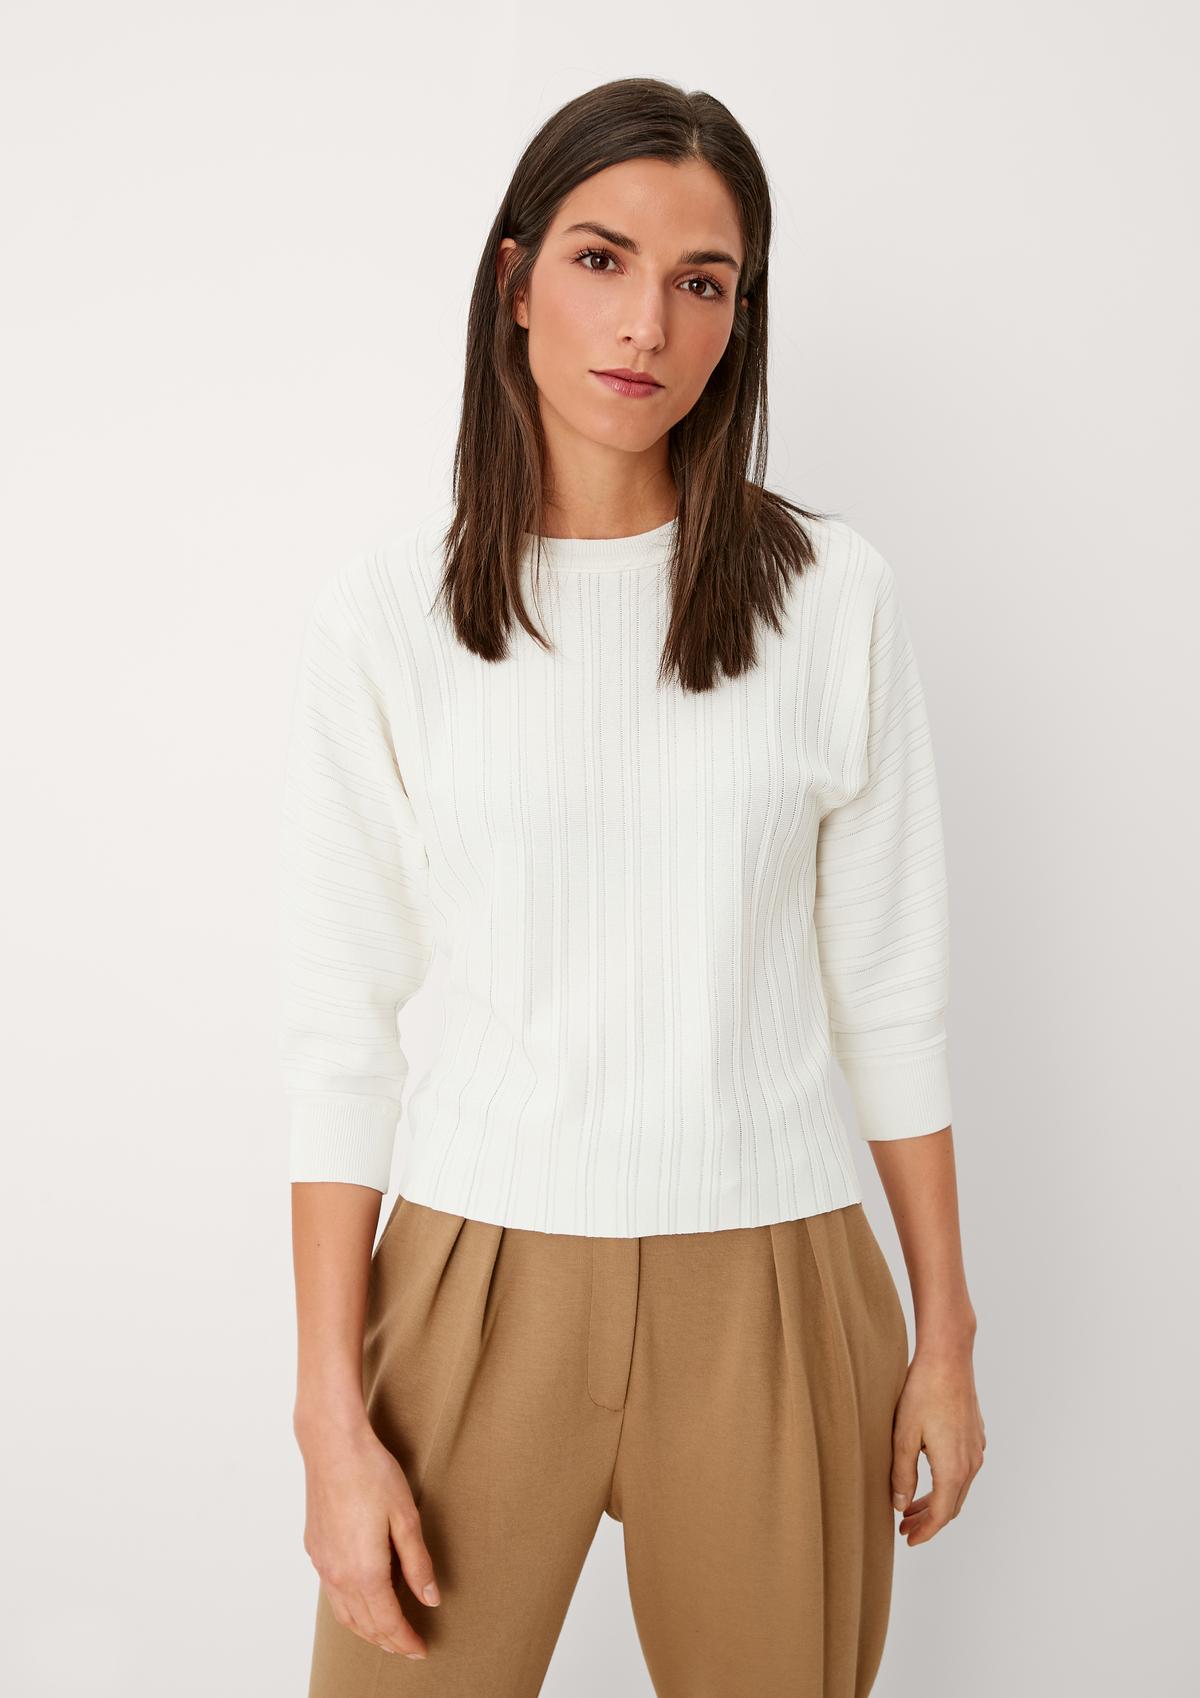 Jumper with batwing sleeves